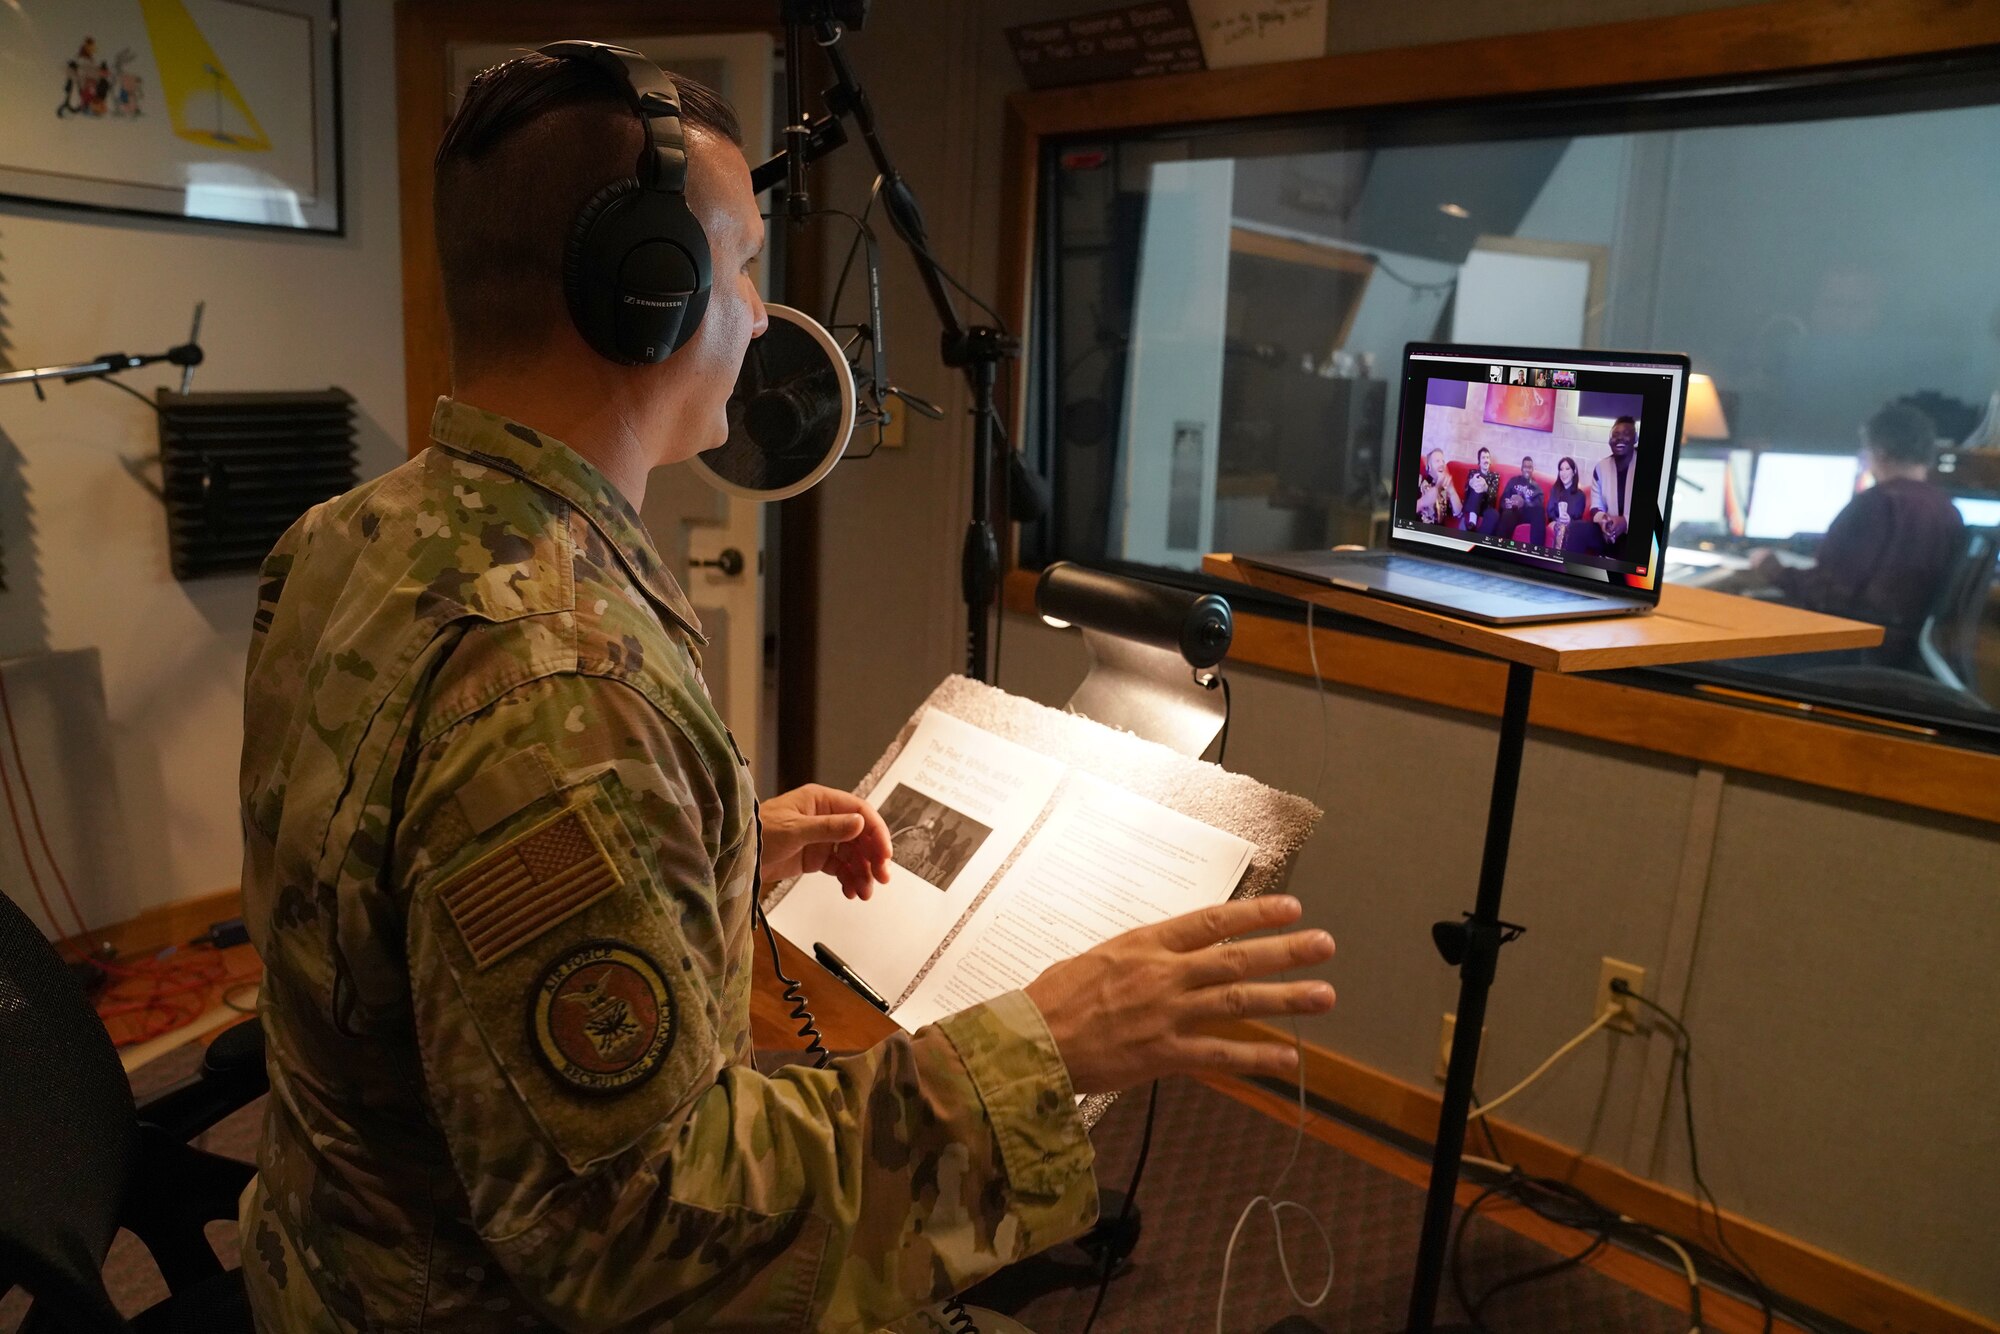 Air Force sergeant conducts a virtual interview with a cappella group Pentatonix